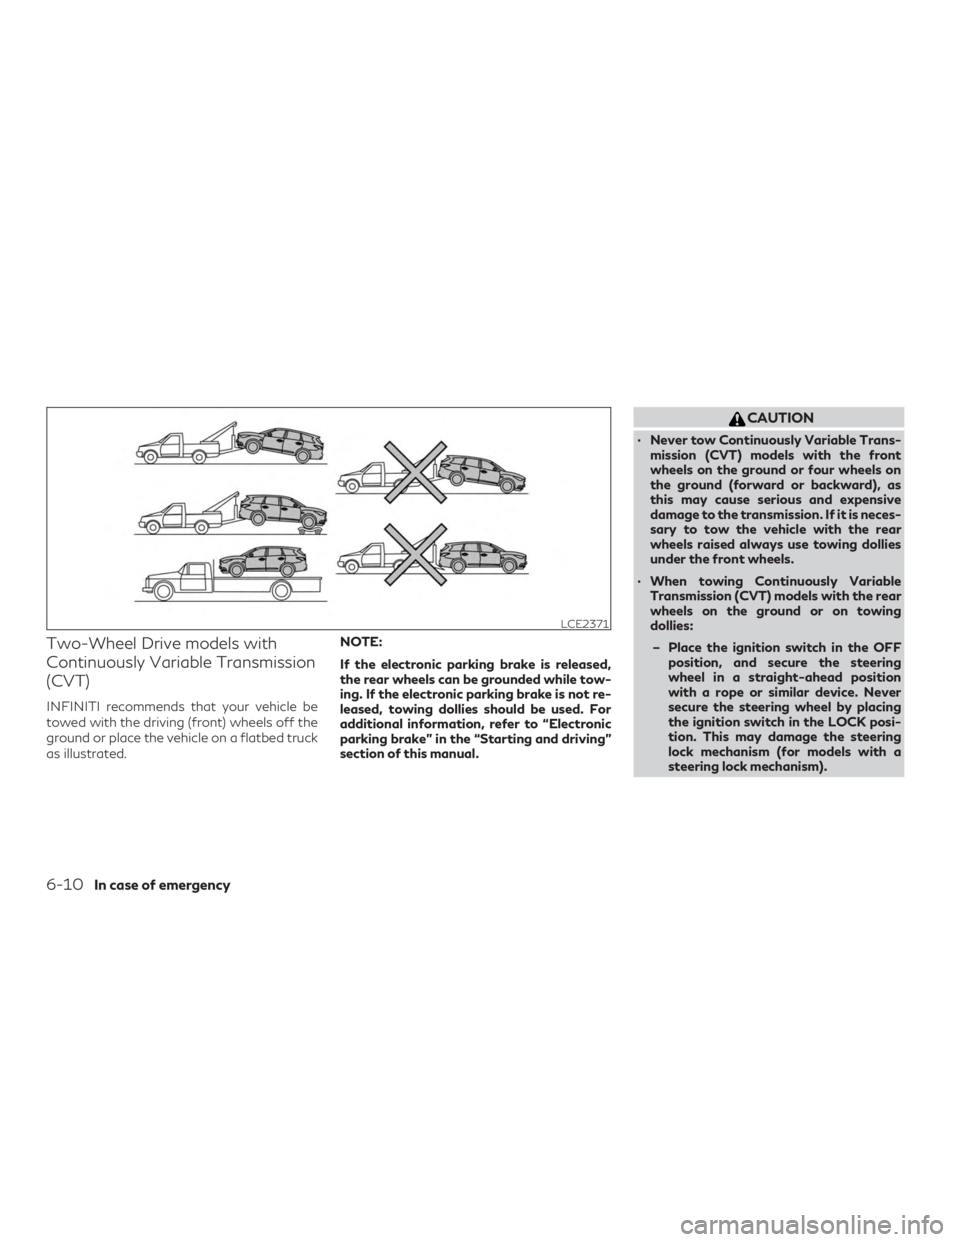 INFINITI QX50 2020  Owners Manual Two-Wheel Drive models with
Continuously Variable Transmission
(CVT)
INFINITI recommends that your vehicle be
towed with the driving (front) wheels off the
ground or place the vehicle on a flatbed tru